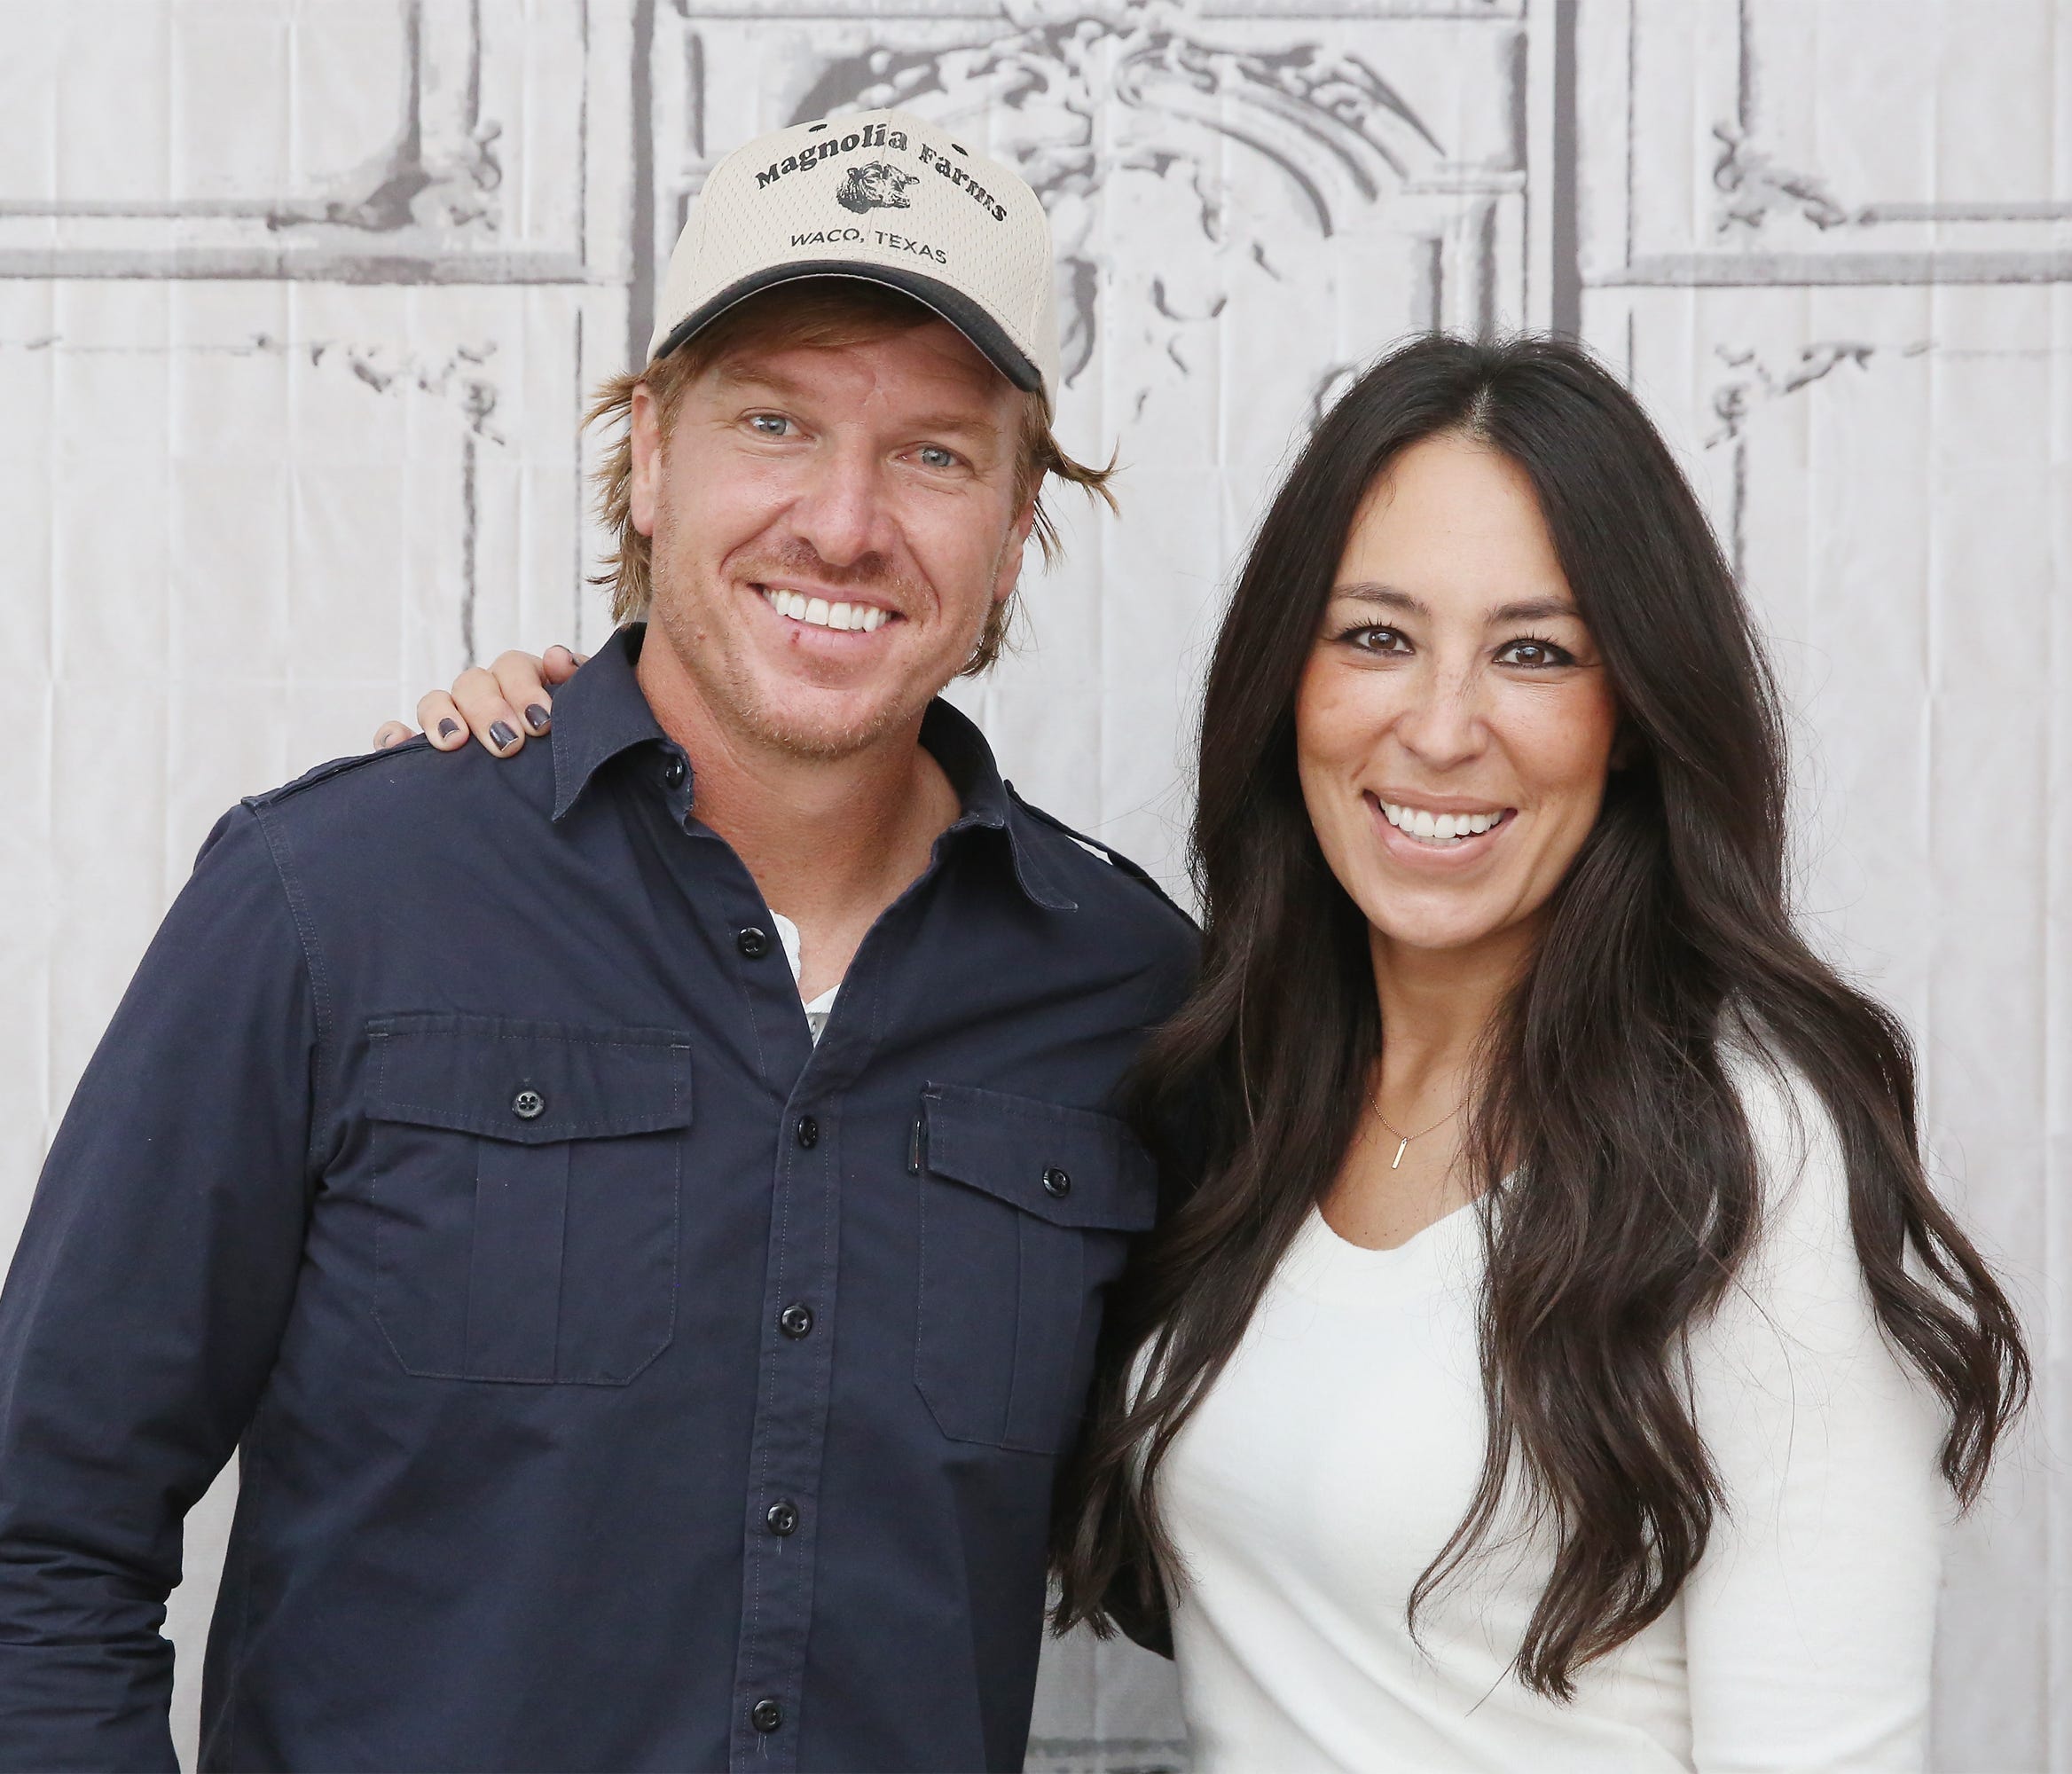 NEW YORK, NY - OCTOBER 19: The Build Series presents Chip Gaines and Joanna Gaines to discuss their new book 